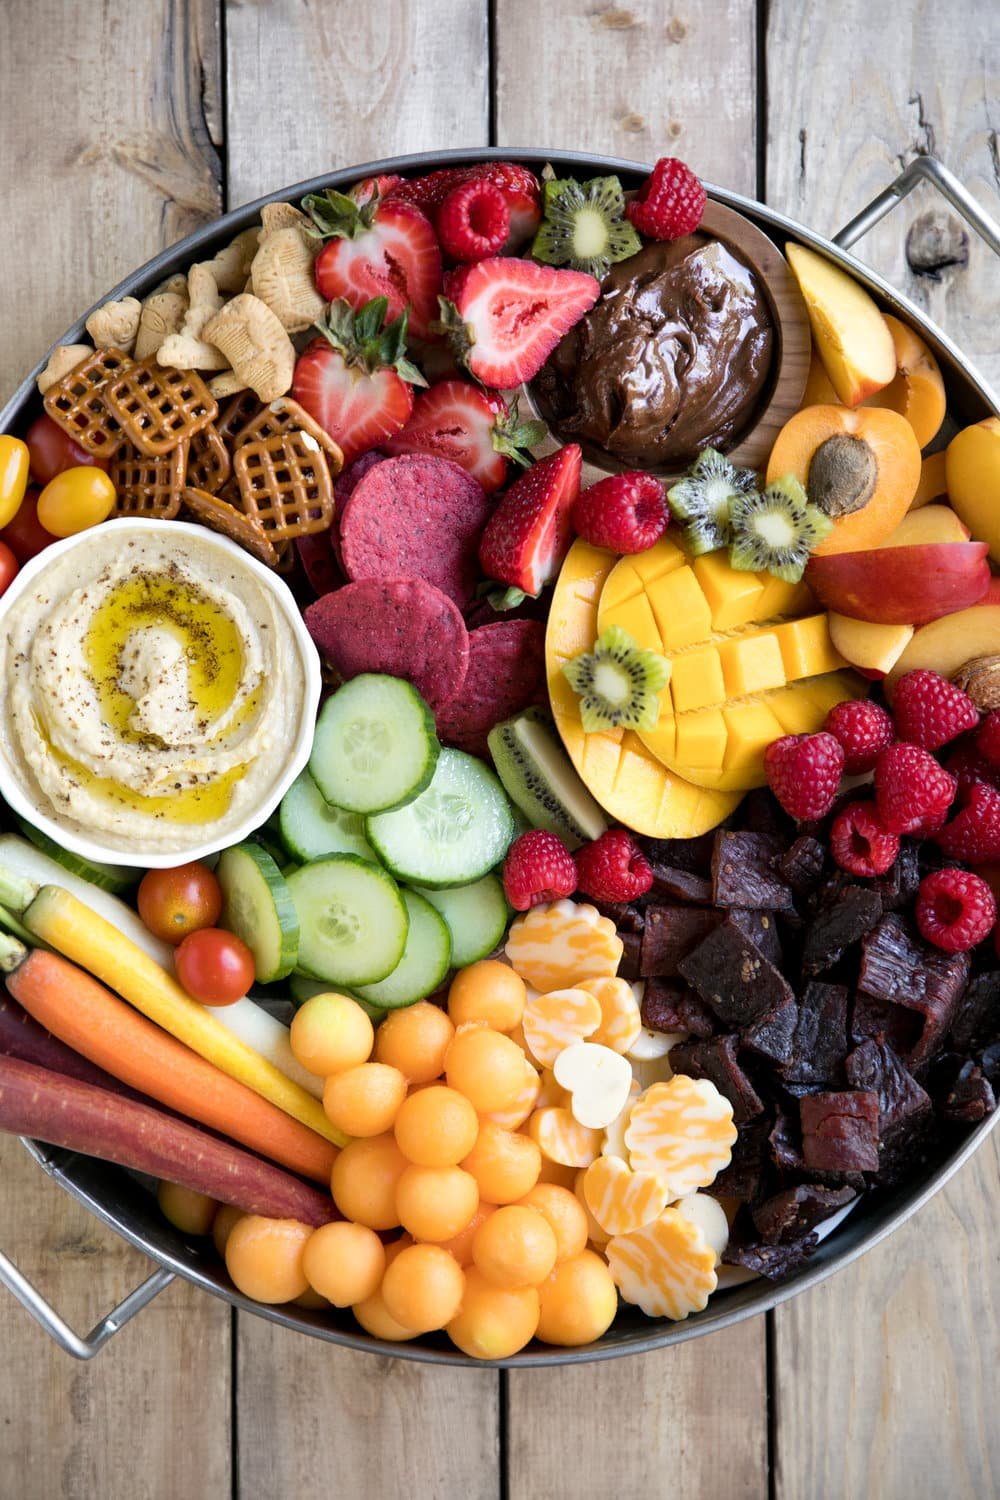 Bright, colorful, and jam-packed with delicious snacks both kids and adults will love, this super easy Kid-Friendly Charcuterie Board will be the highlight of any party! Filled with fresh fruit, cheese, meat snacks, nutella, hummus, and fresh chopped veggies.